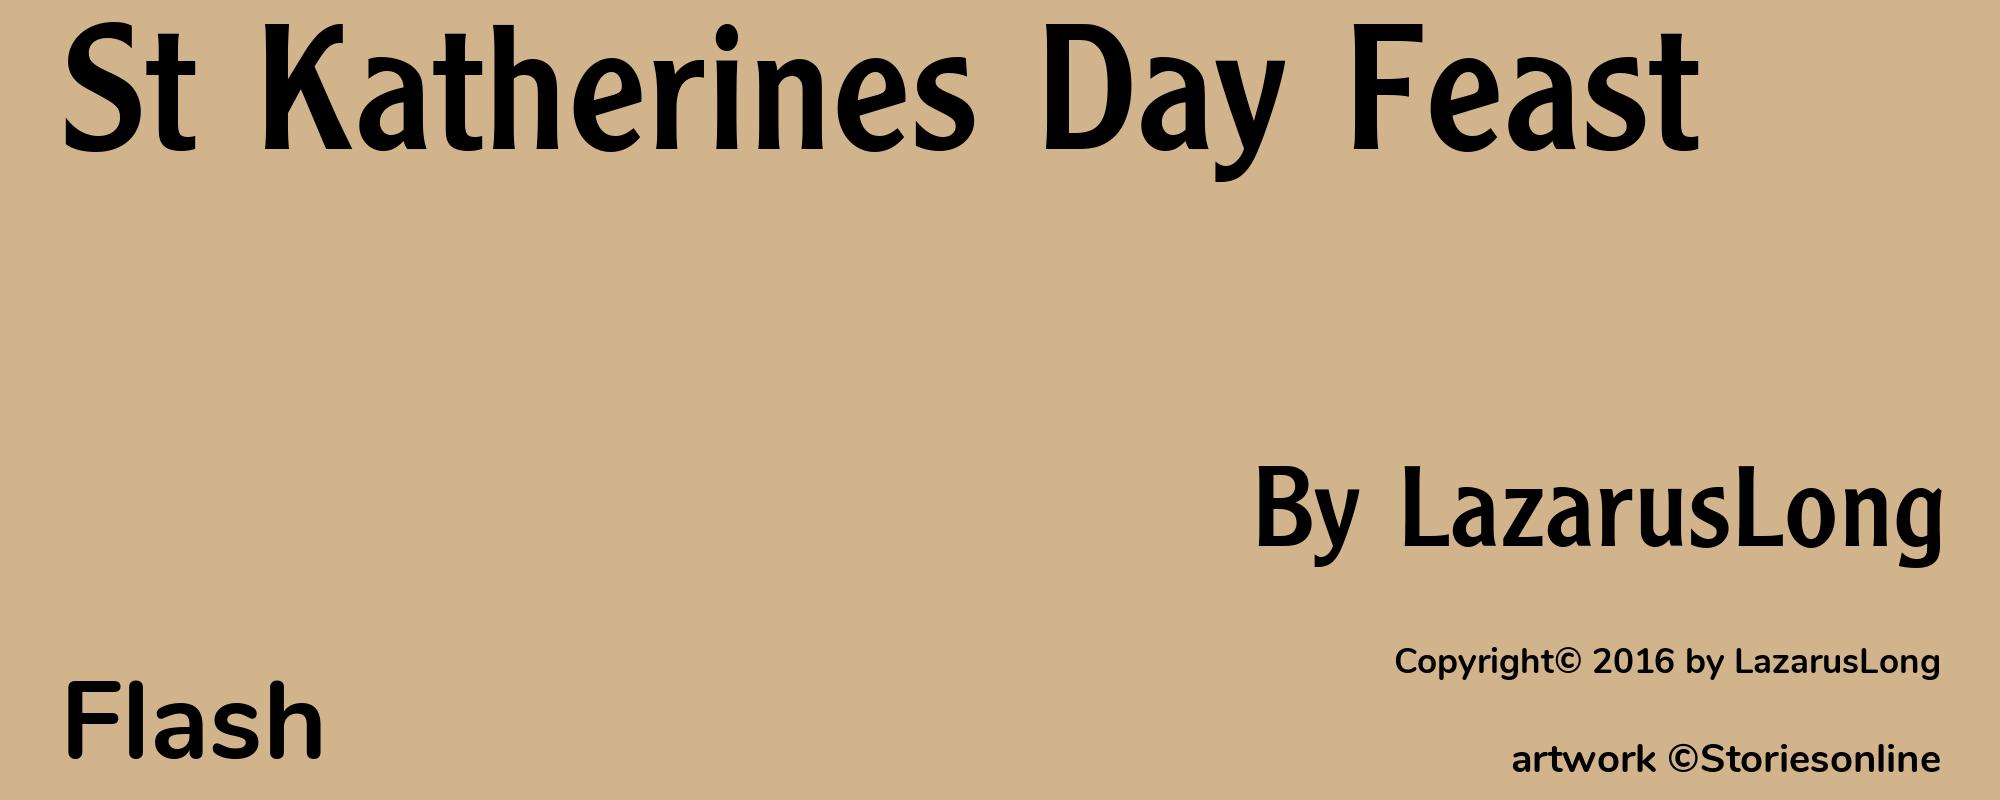 St Katherines Day Feast - Cover